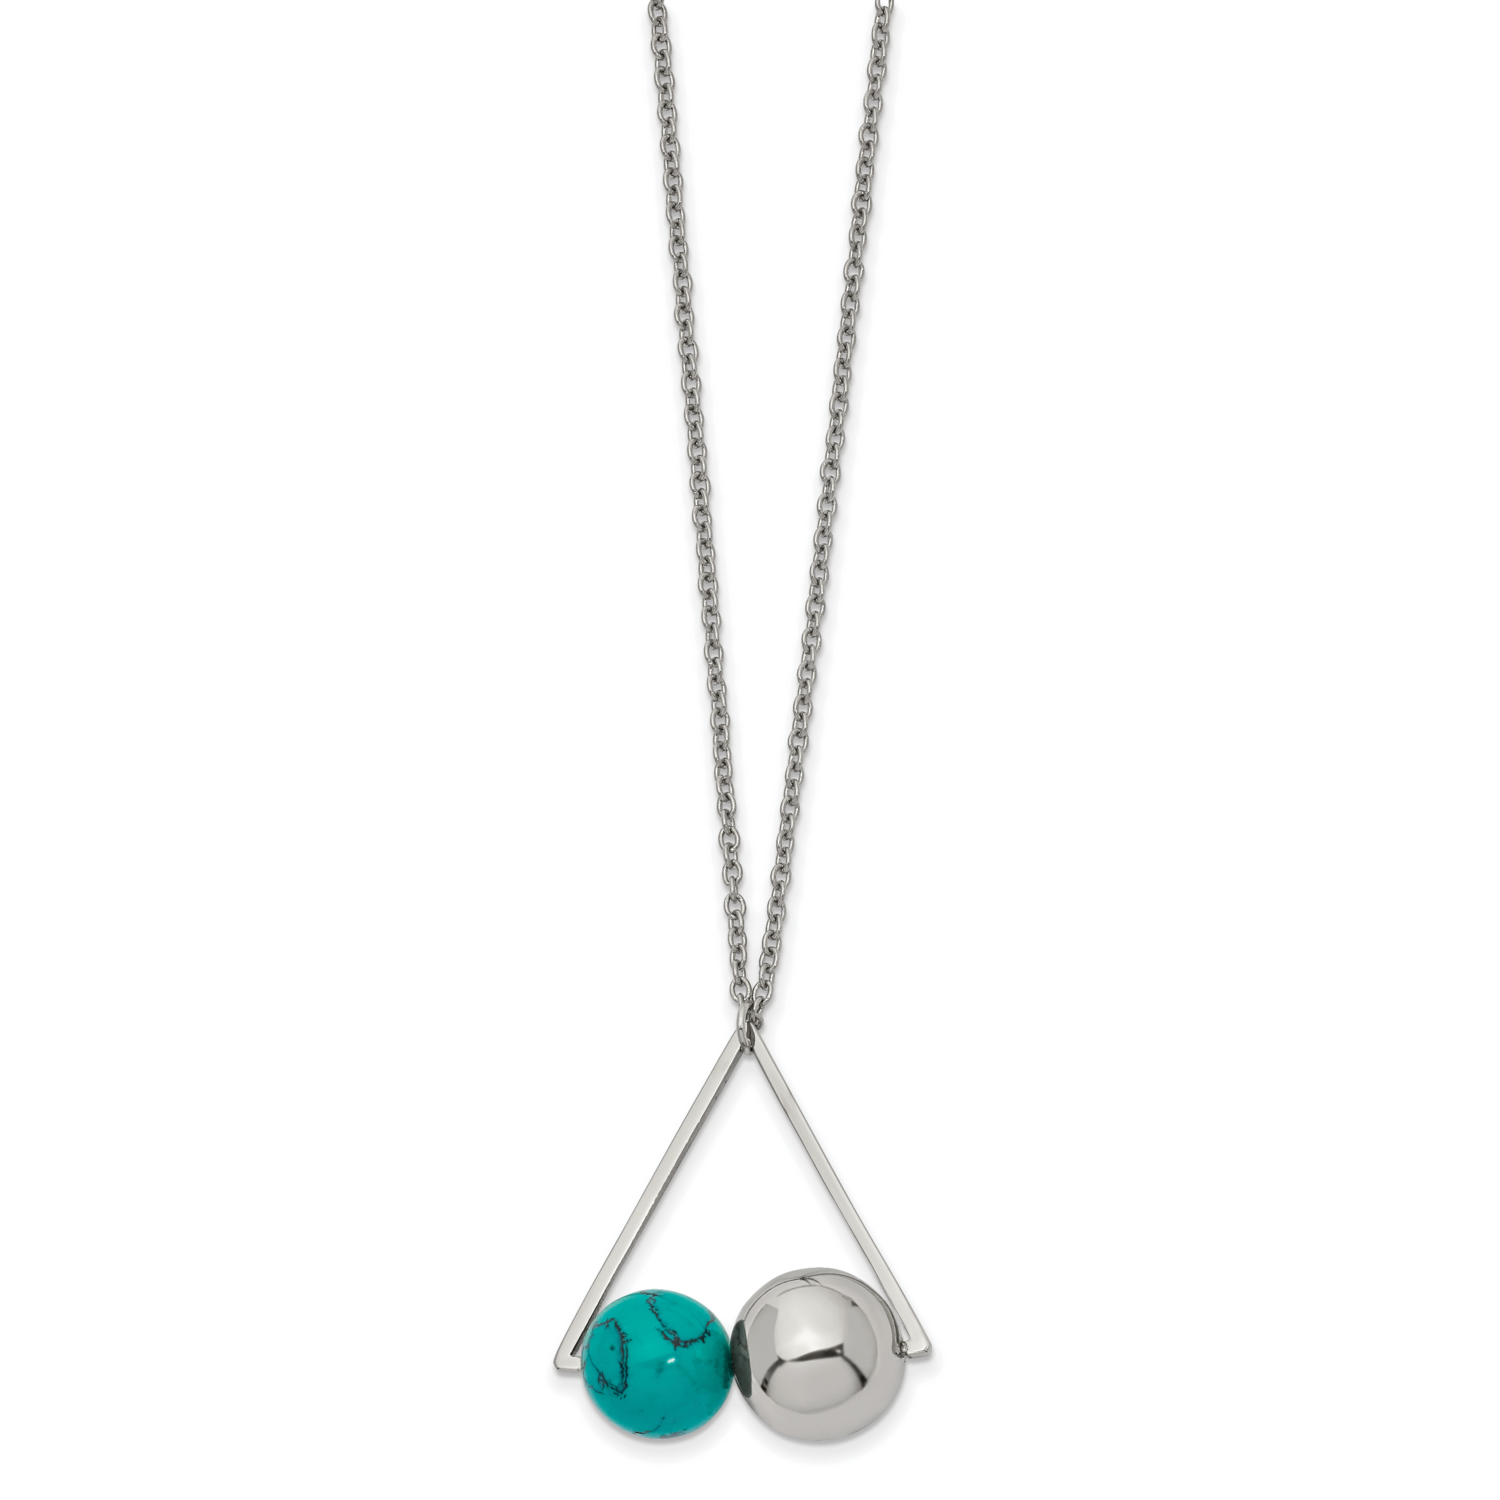 Triangle Imit.Turquoise 2 Inch Extension Necklace Stainless Steel Polished SRN2566-16